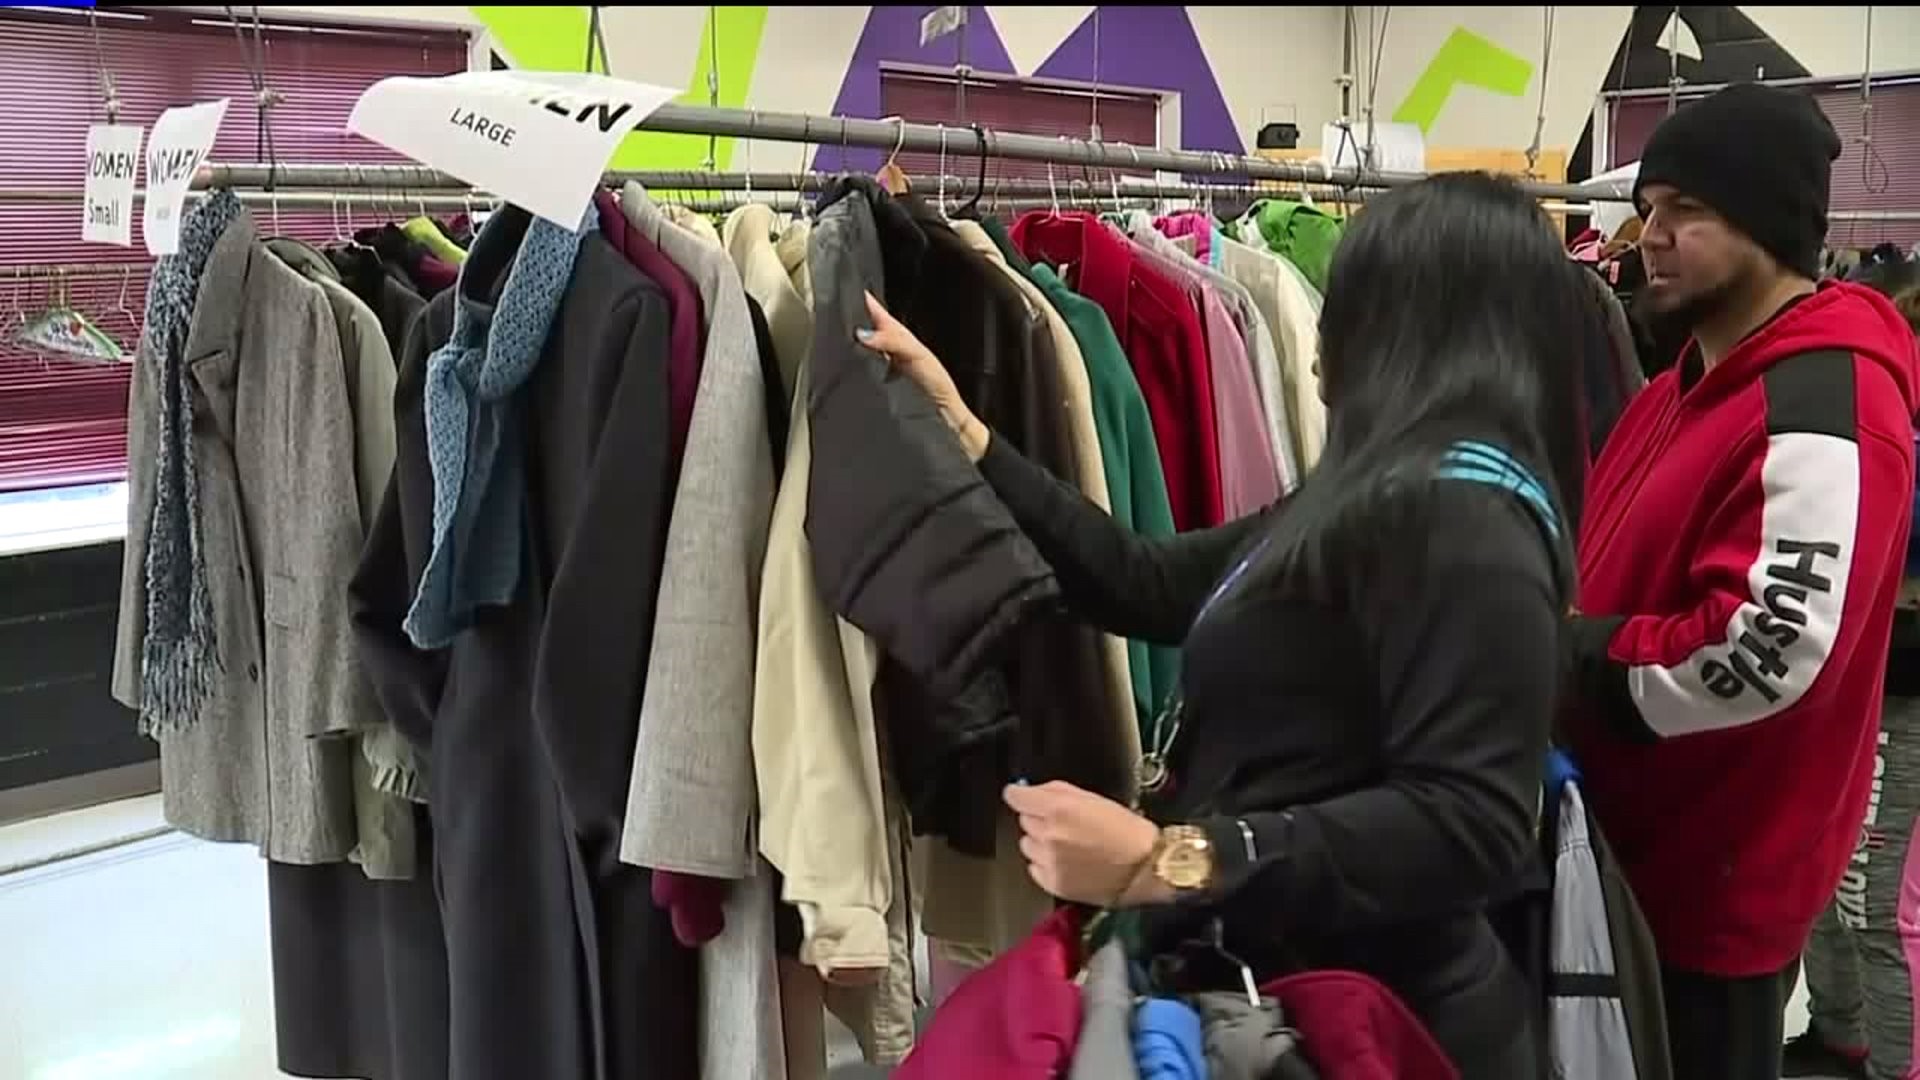 Greater Susquehanna Valley YMCA Keeping Folks Warm with Annual Coat Drive